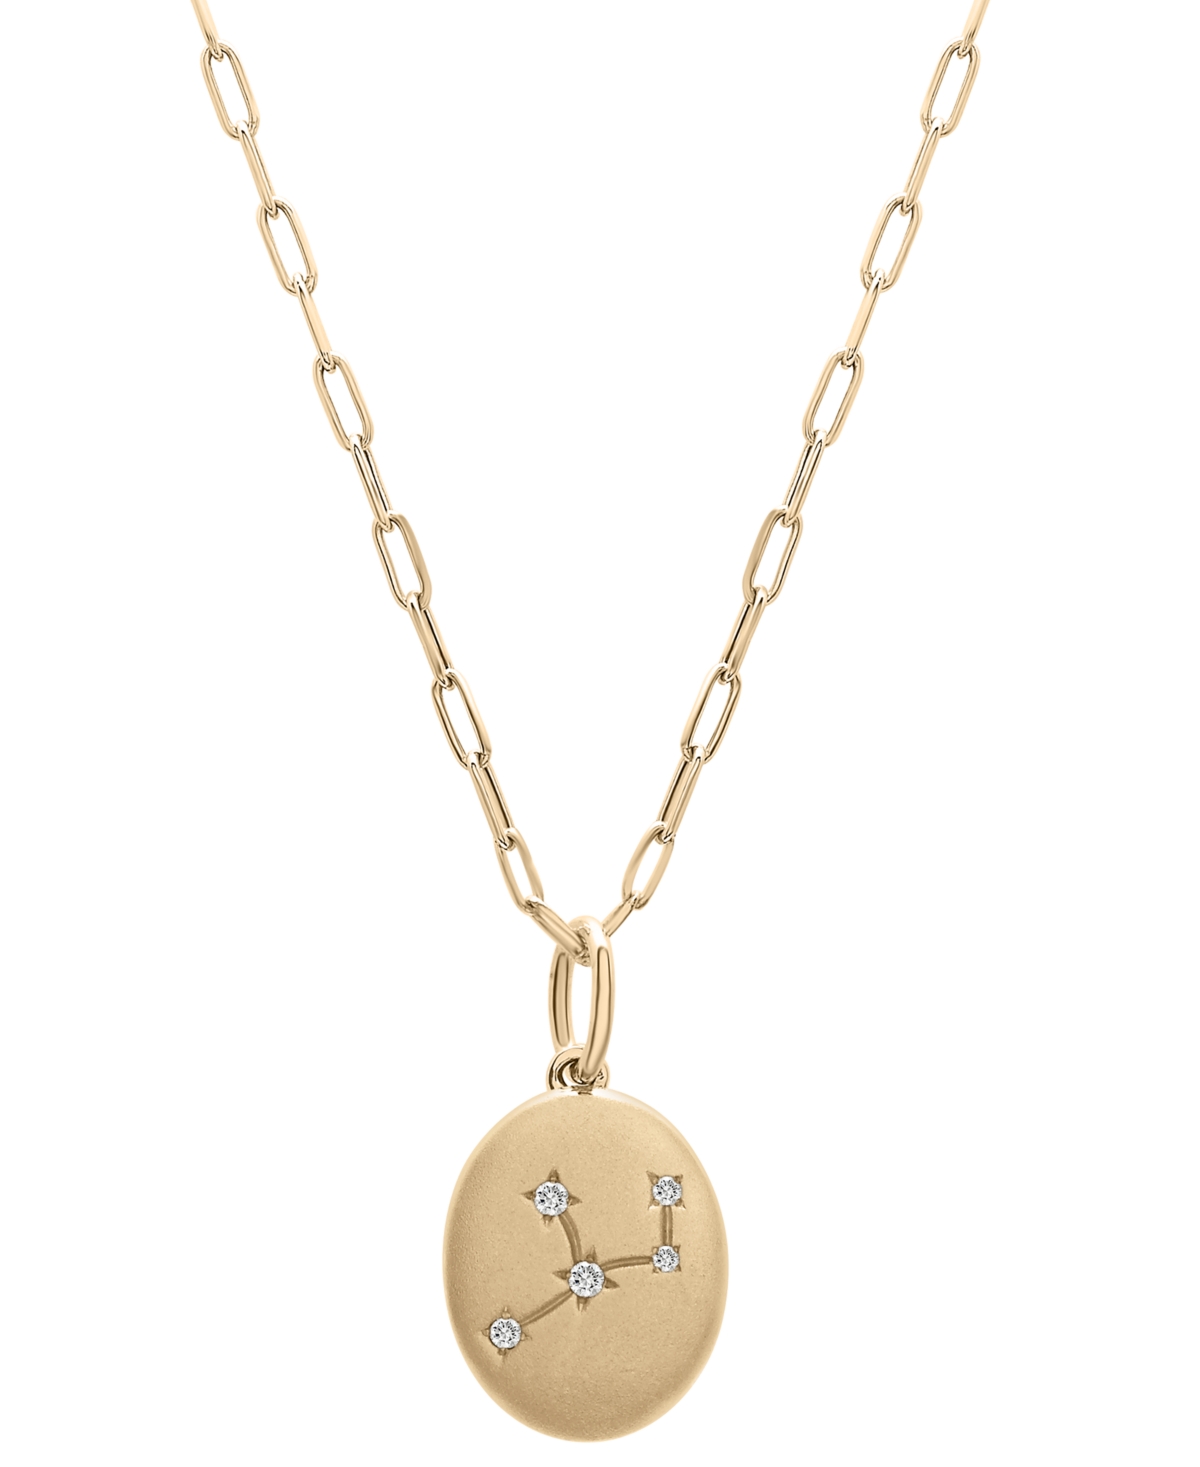 Diamond Virgo Constellation 18" Pendant Necklace (1/20 ct. tw) in 10k Yellow Gold, Created for Macy's - Yellow Gold